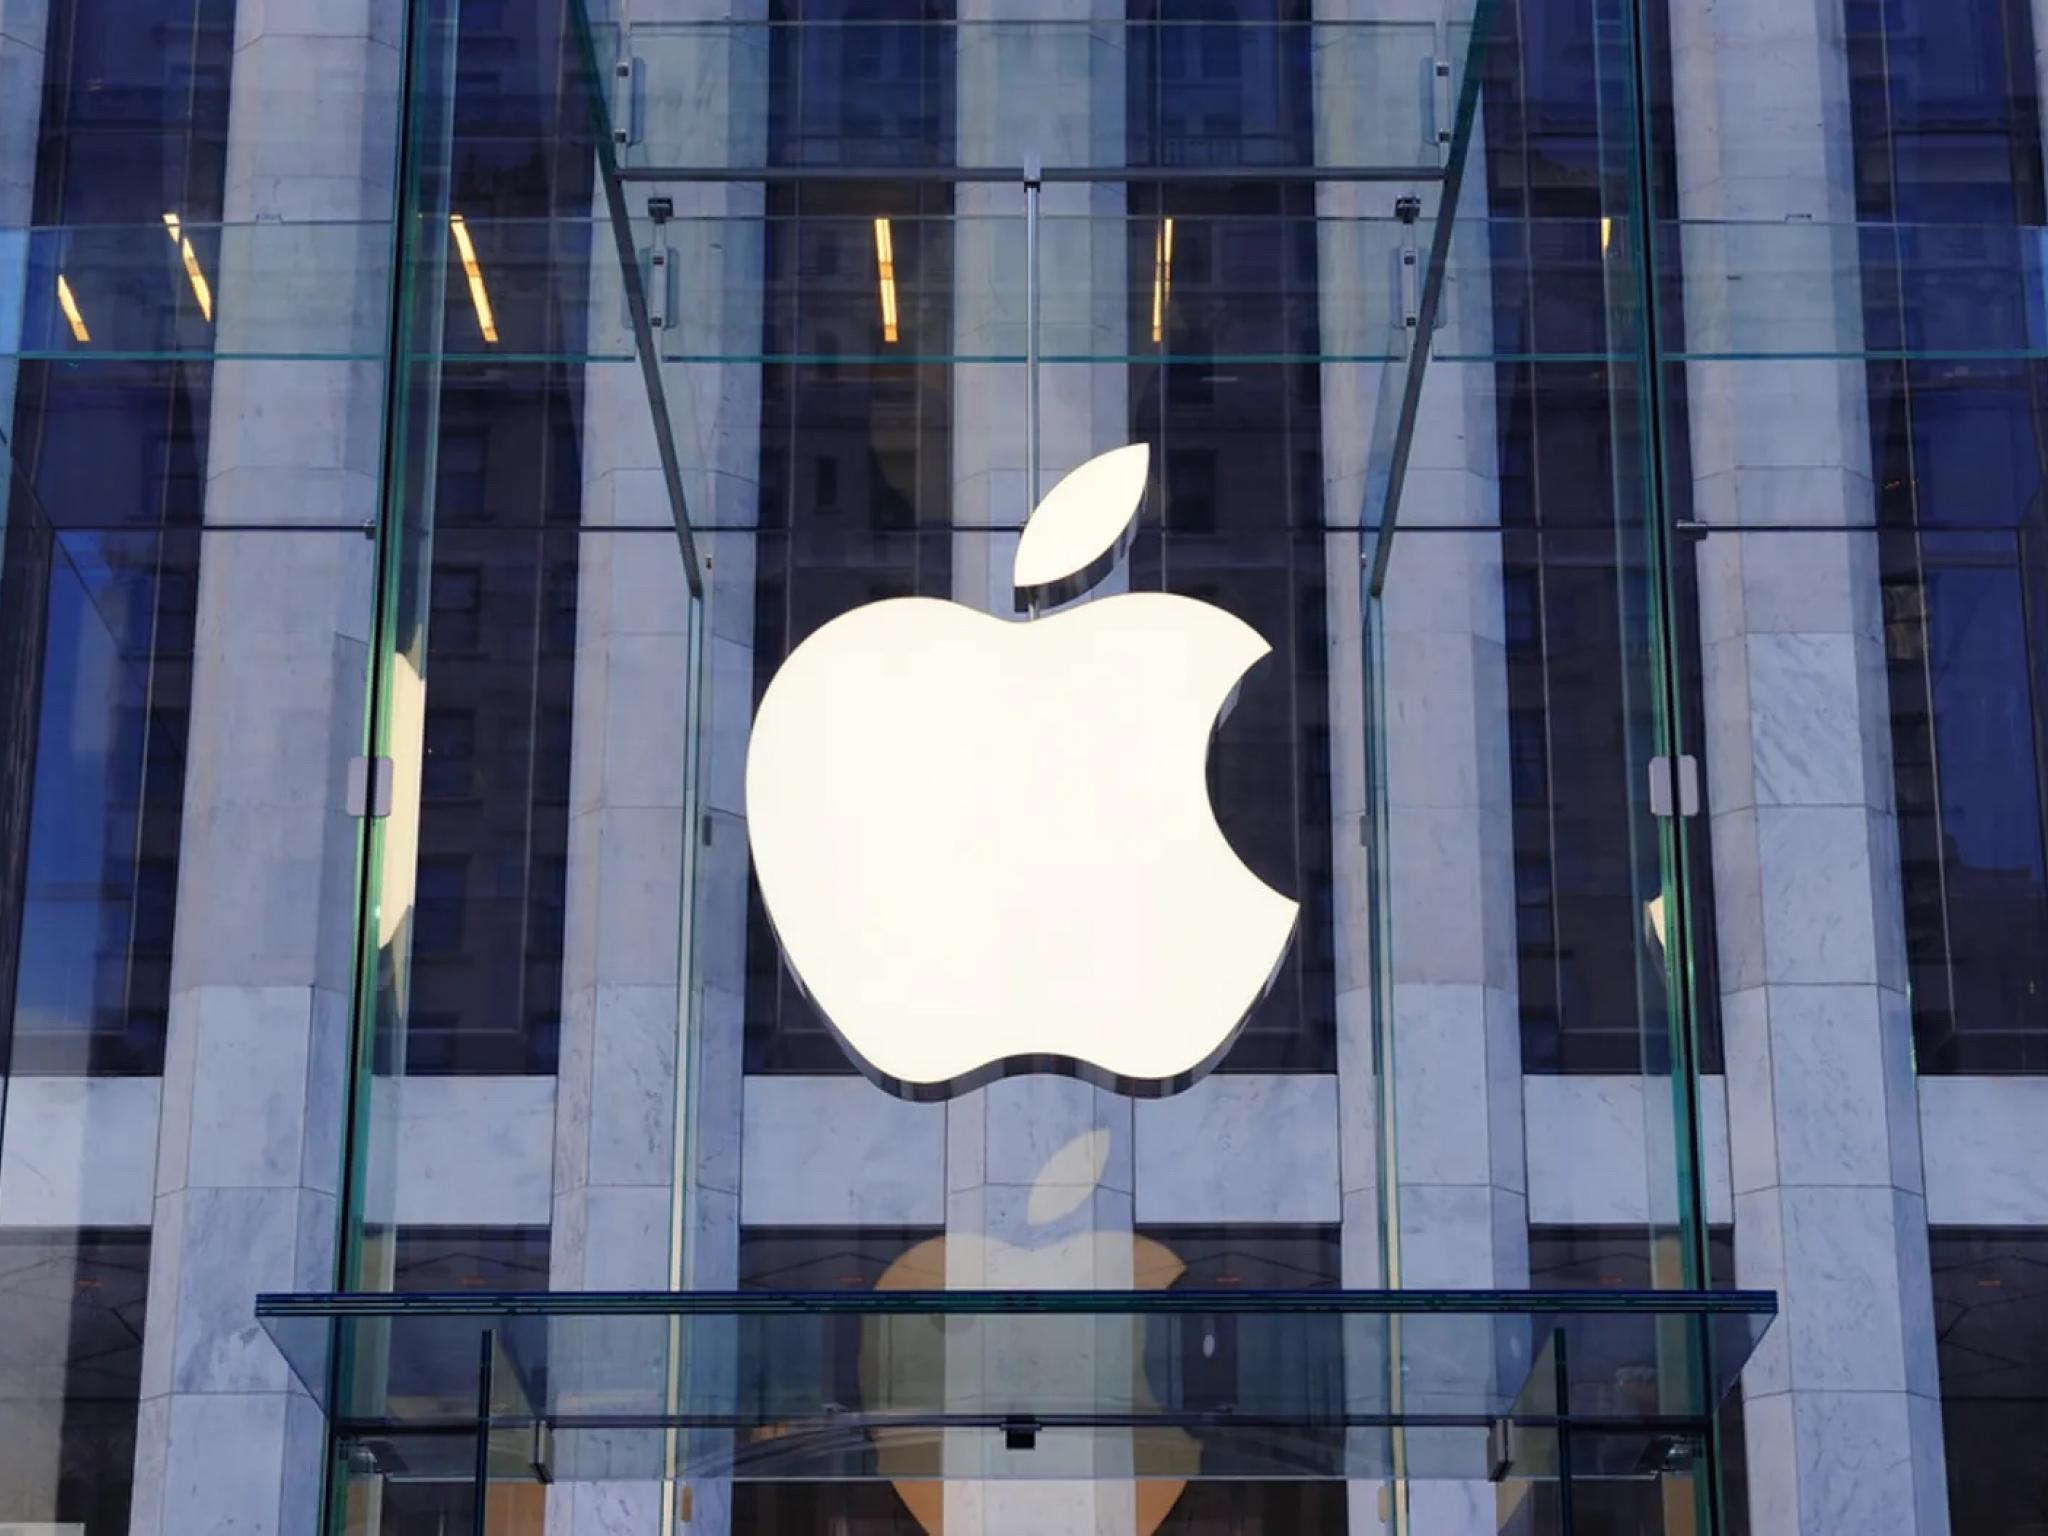  apple-faces-rising-competition-in-china-as-rivals-gain-ground 